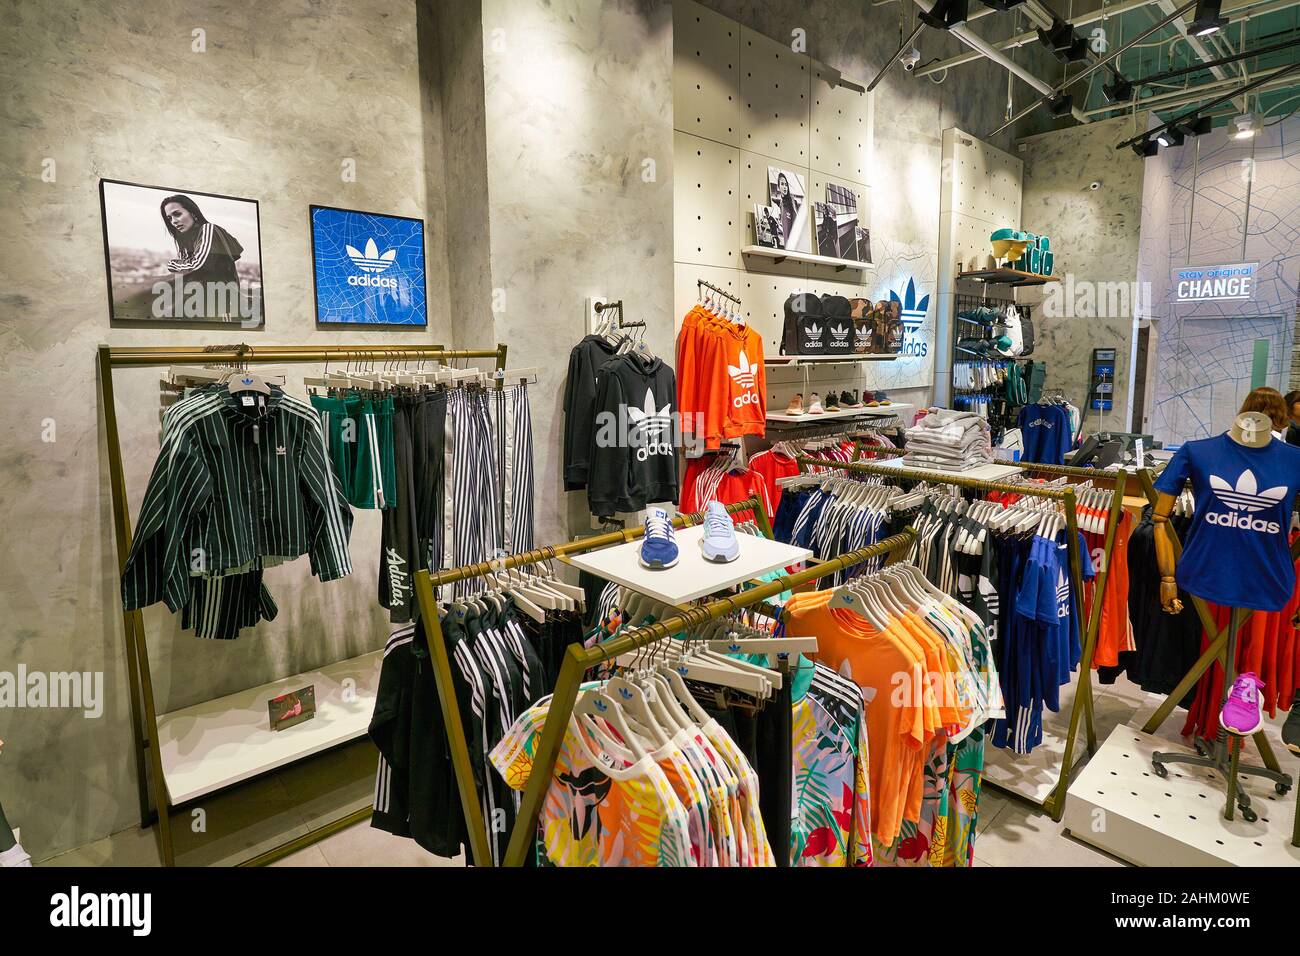 adidas store outlet mall